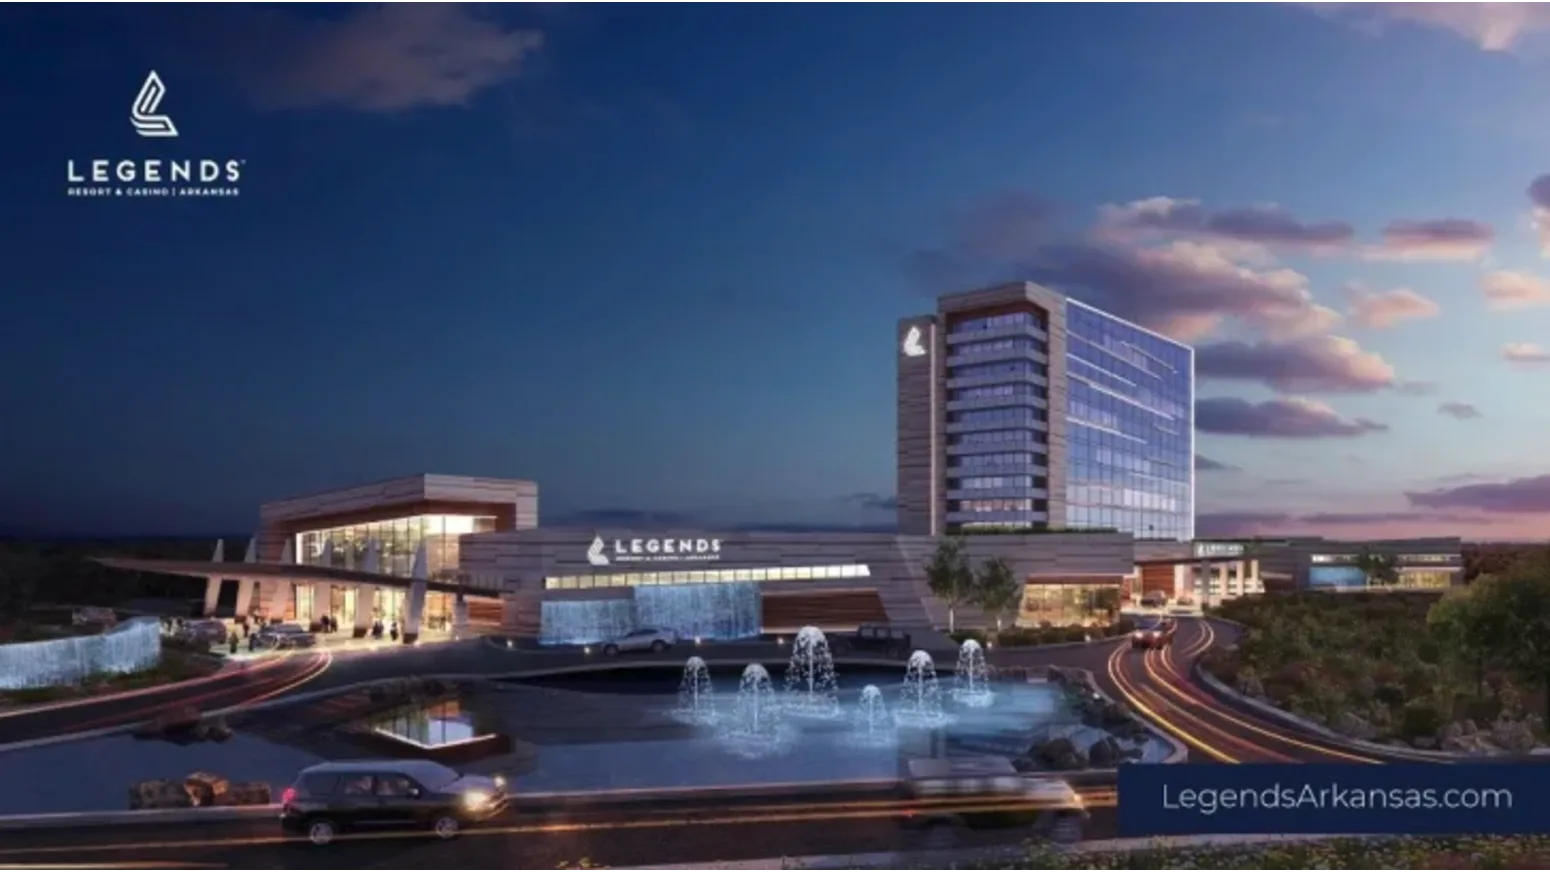 CHEROKEE NATION BUSINESSES AND LEGENDS UNVEIL PLANS FOR PROPOSED RESORT AND CASINO IN POPE COUNTY, ARKANSAS